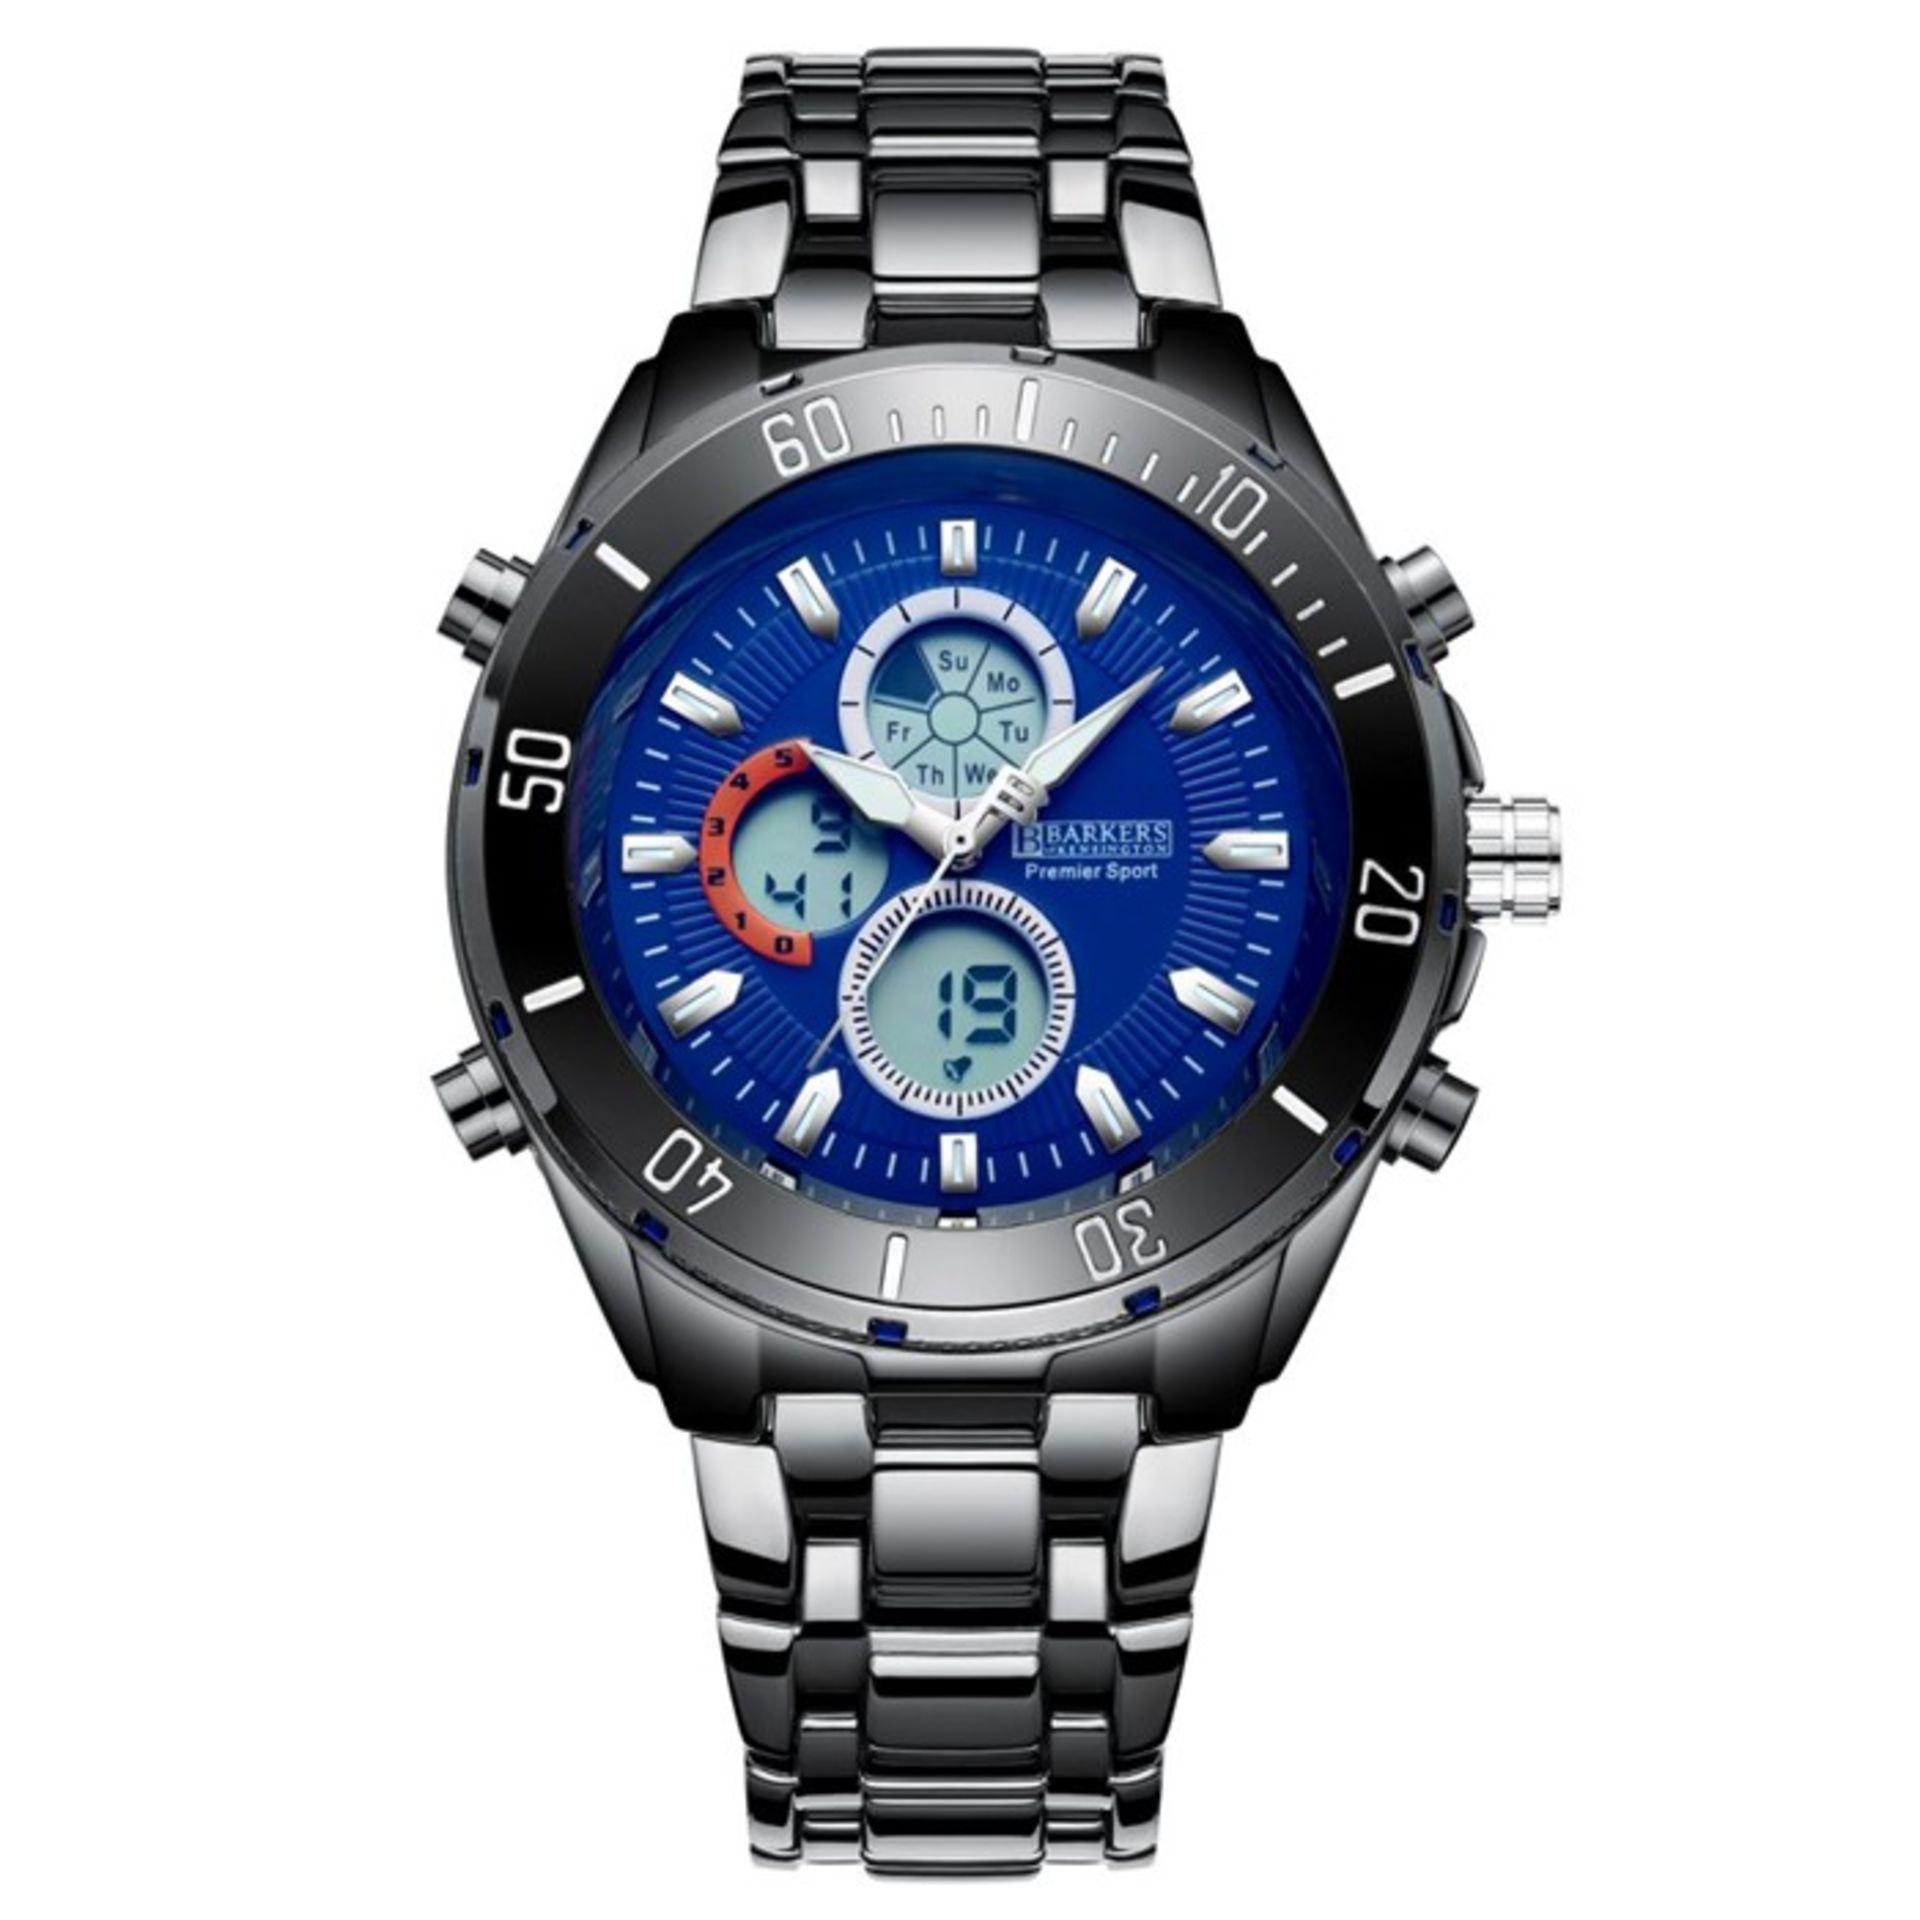 1 BRAND NEW BOXED BARKERS OF KENSINGTON PREMIER SPORT WATCH IN BLUE / RRP £455.00 (VIEWING HIGHLY